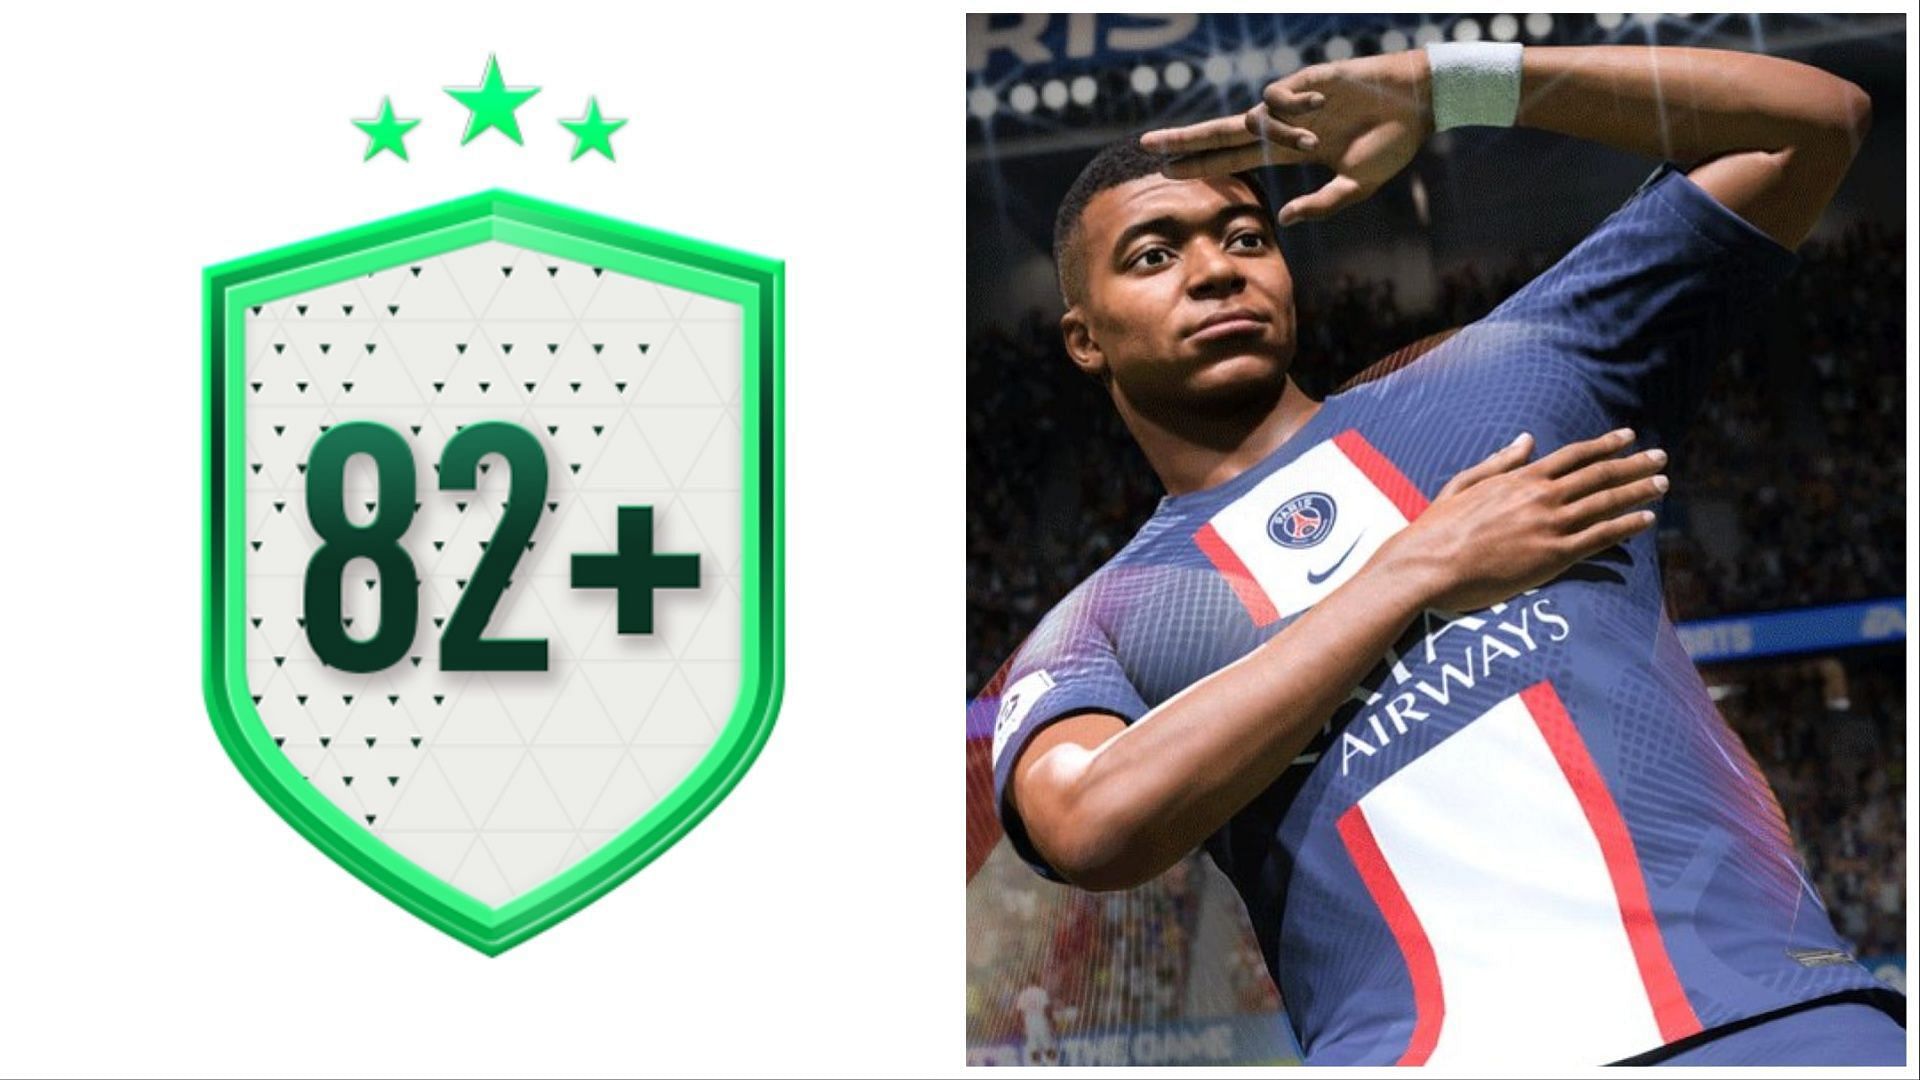 The latest Upgrade SBC is now live (Images via EA Sports)